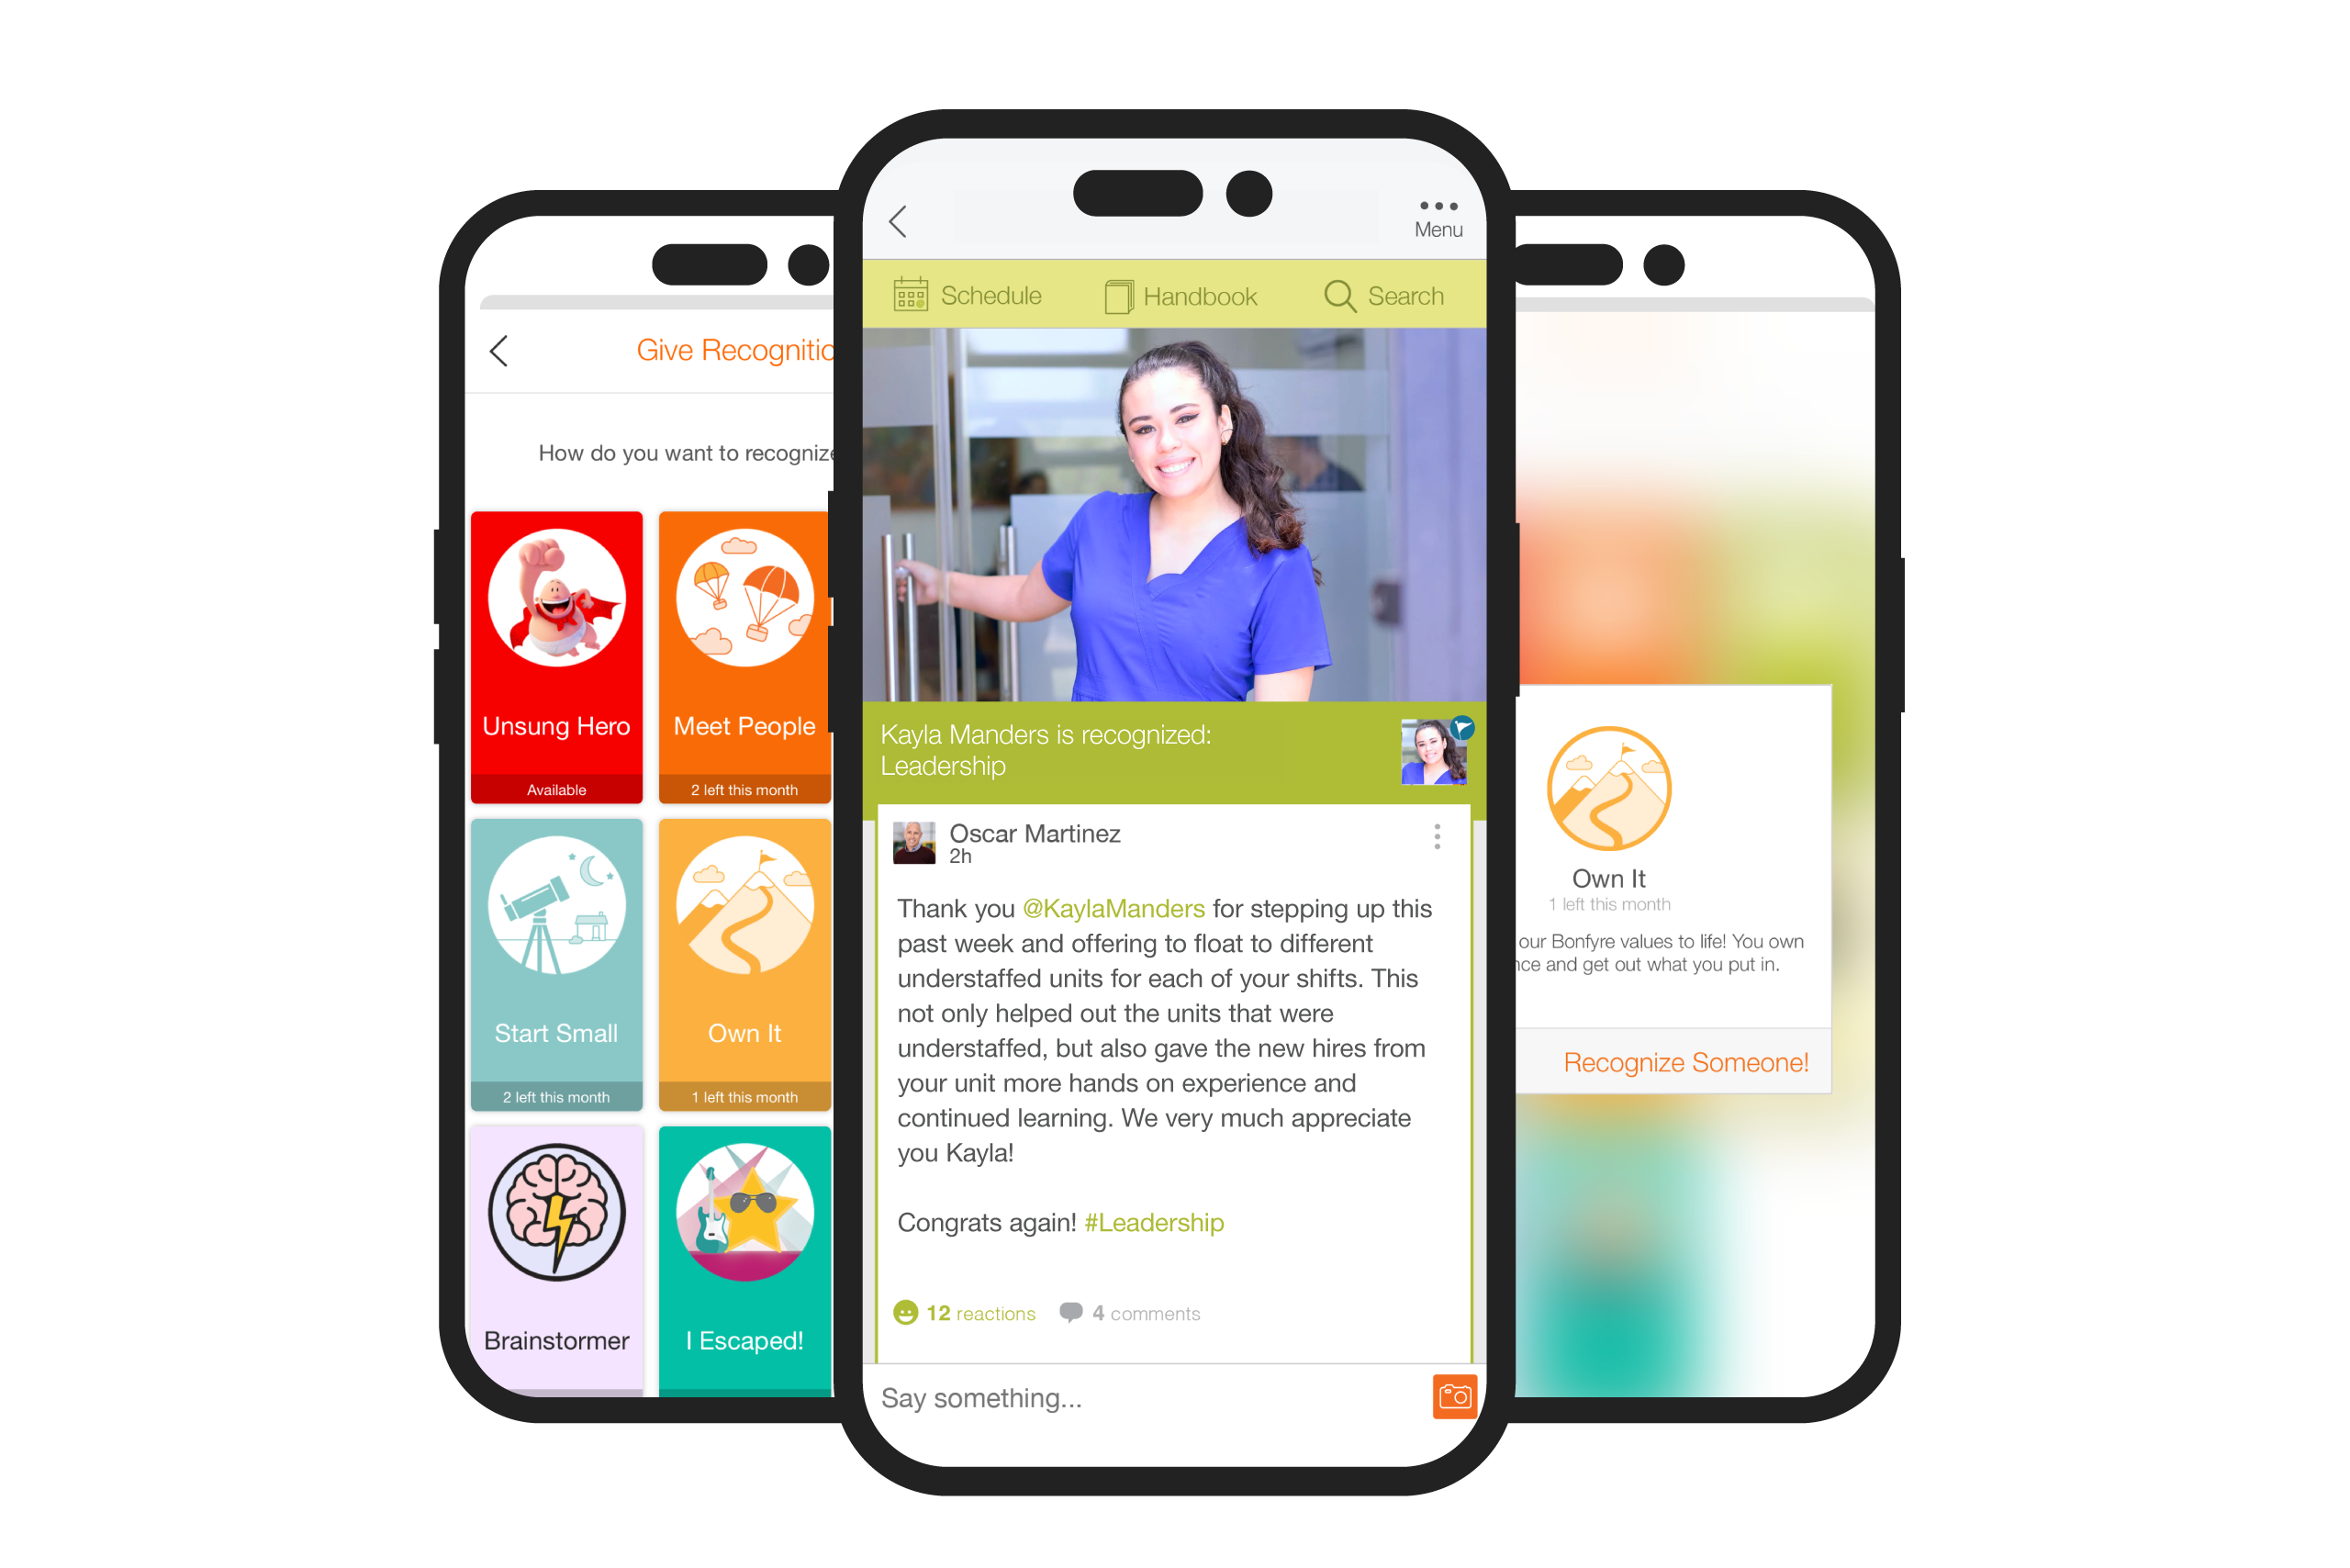 A healthcare mobile app featuring a woman's face on its interface.